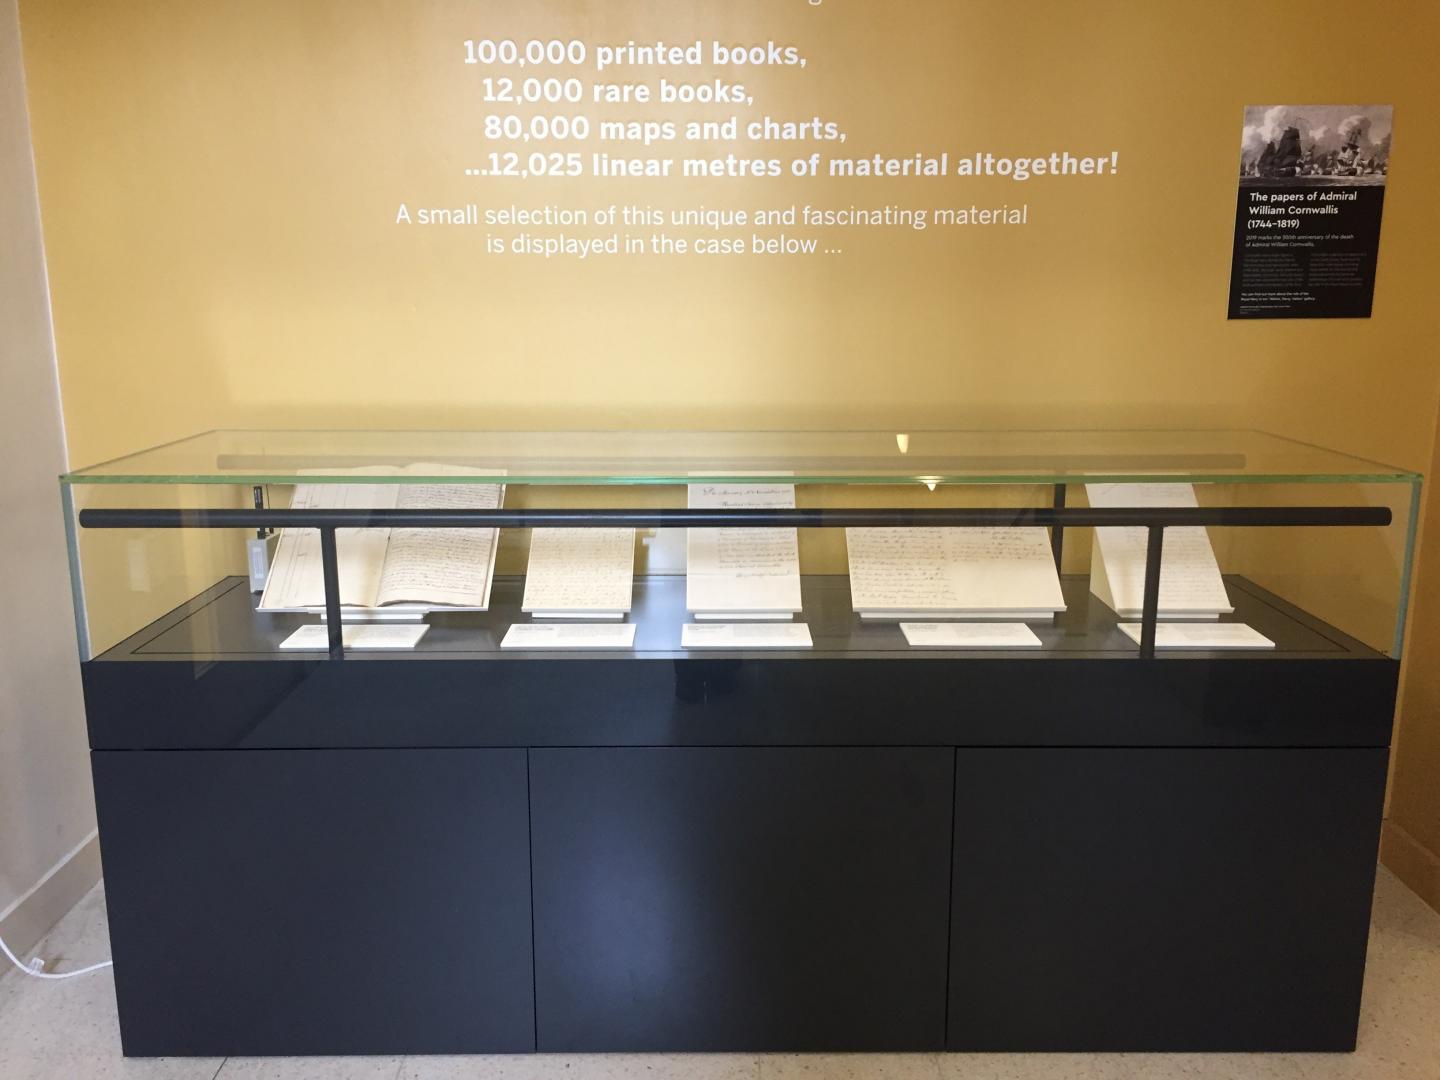 The Caird Library Display Case